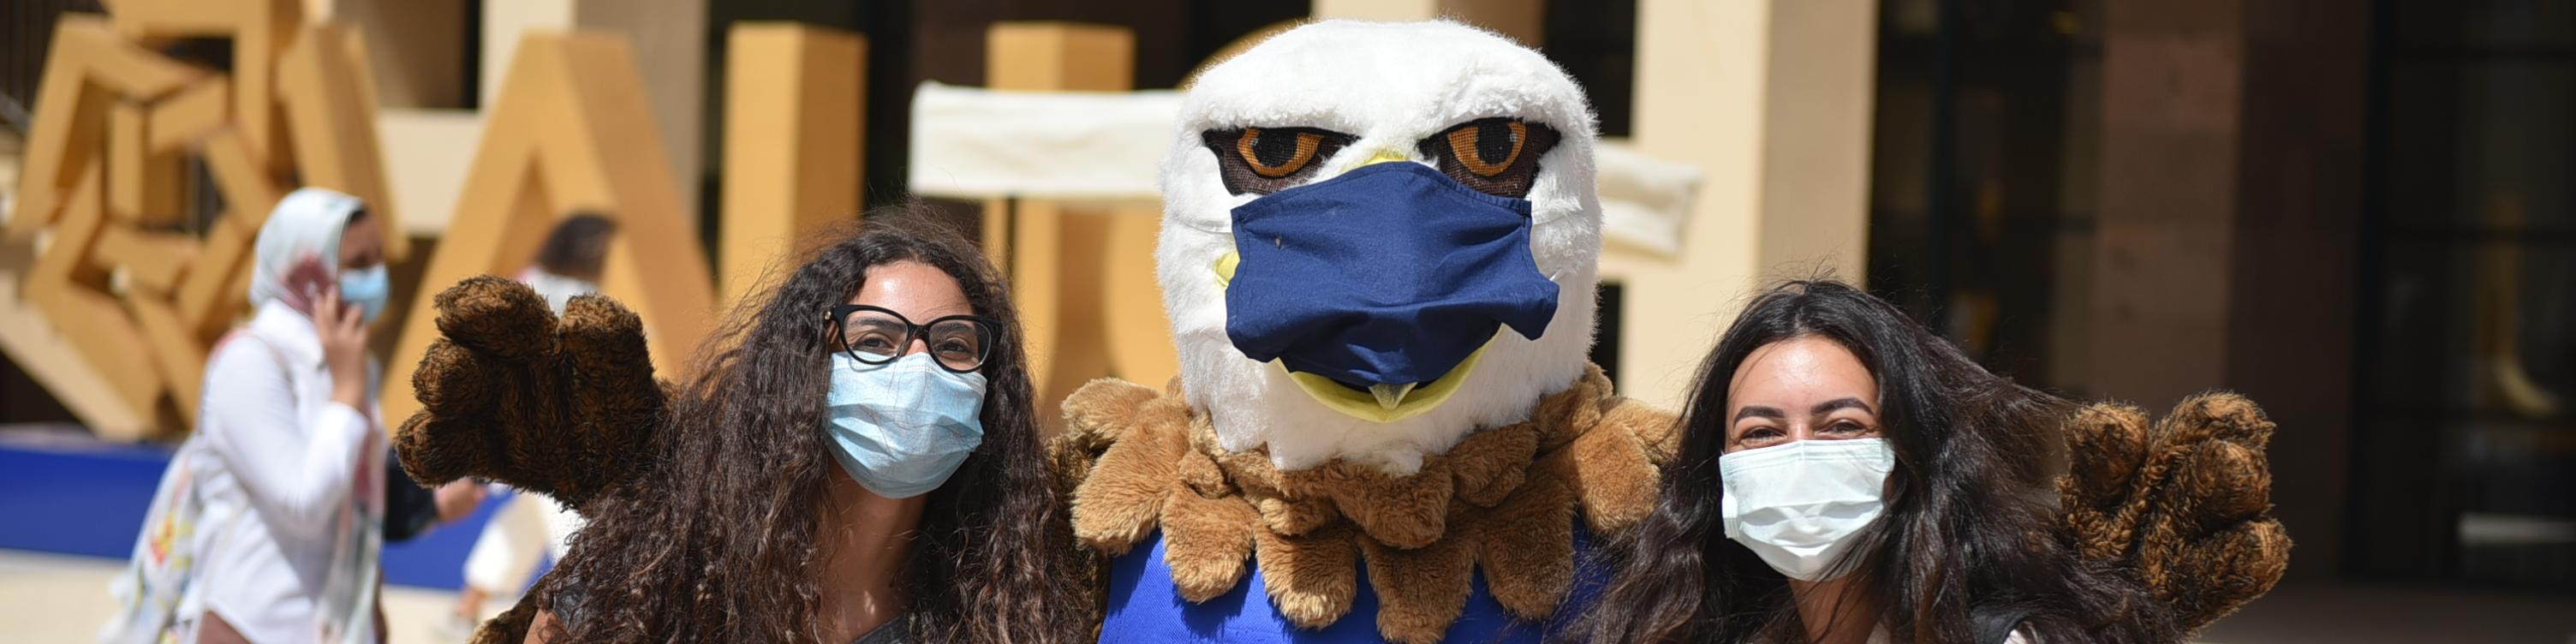 AUC Masked Mascot with Students